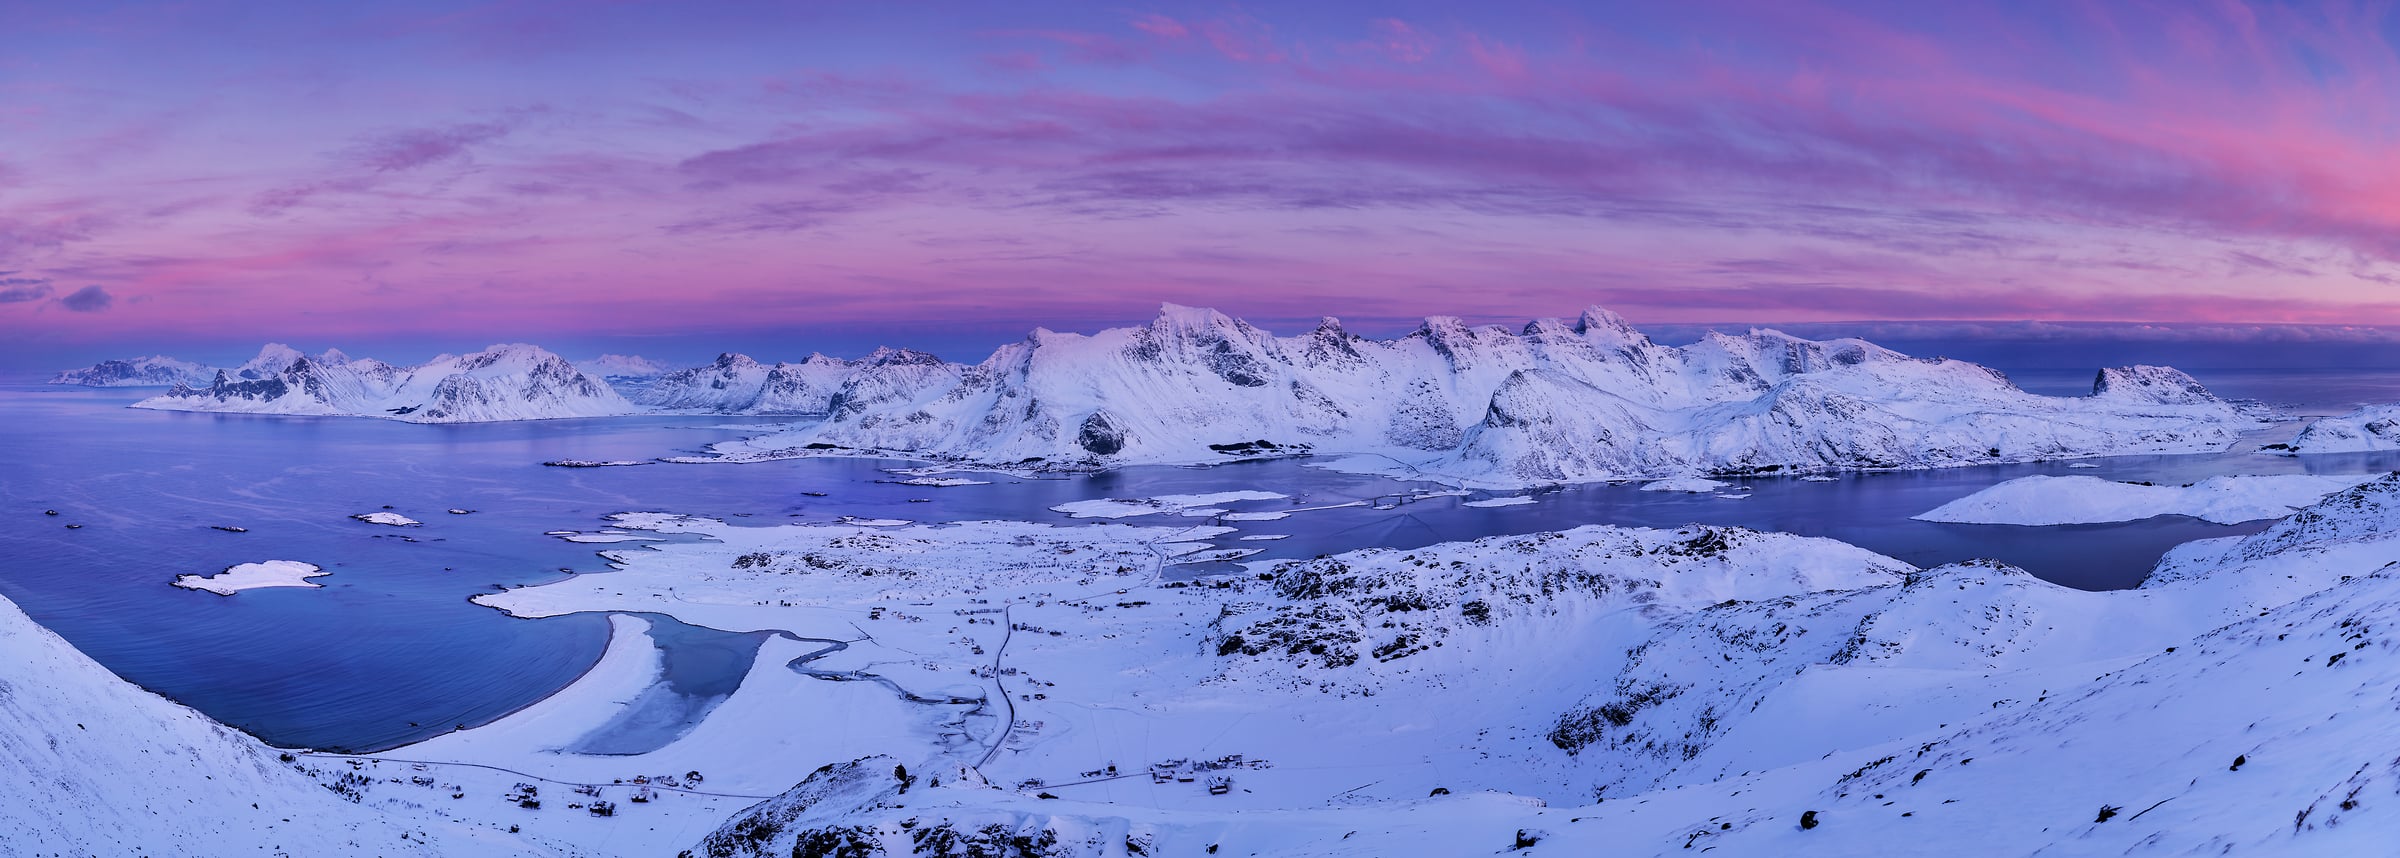 2,498 megapixels! A very high resolution, large-format VAST photo print of snow-covered mountains, the ocean, and beautiful clouds at sunset in the Arctic; landscape photograph created by Martin Kulhavy from Ryten Mountain, Lofoten, Norway.